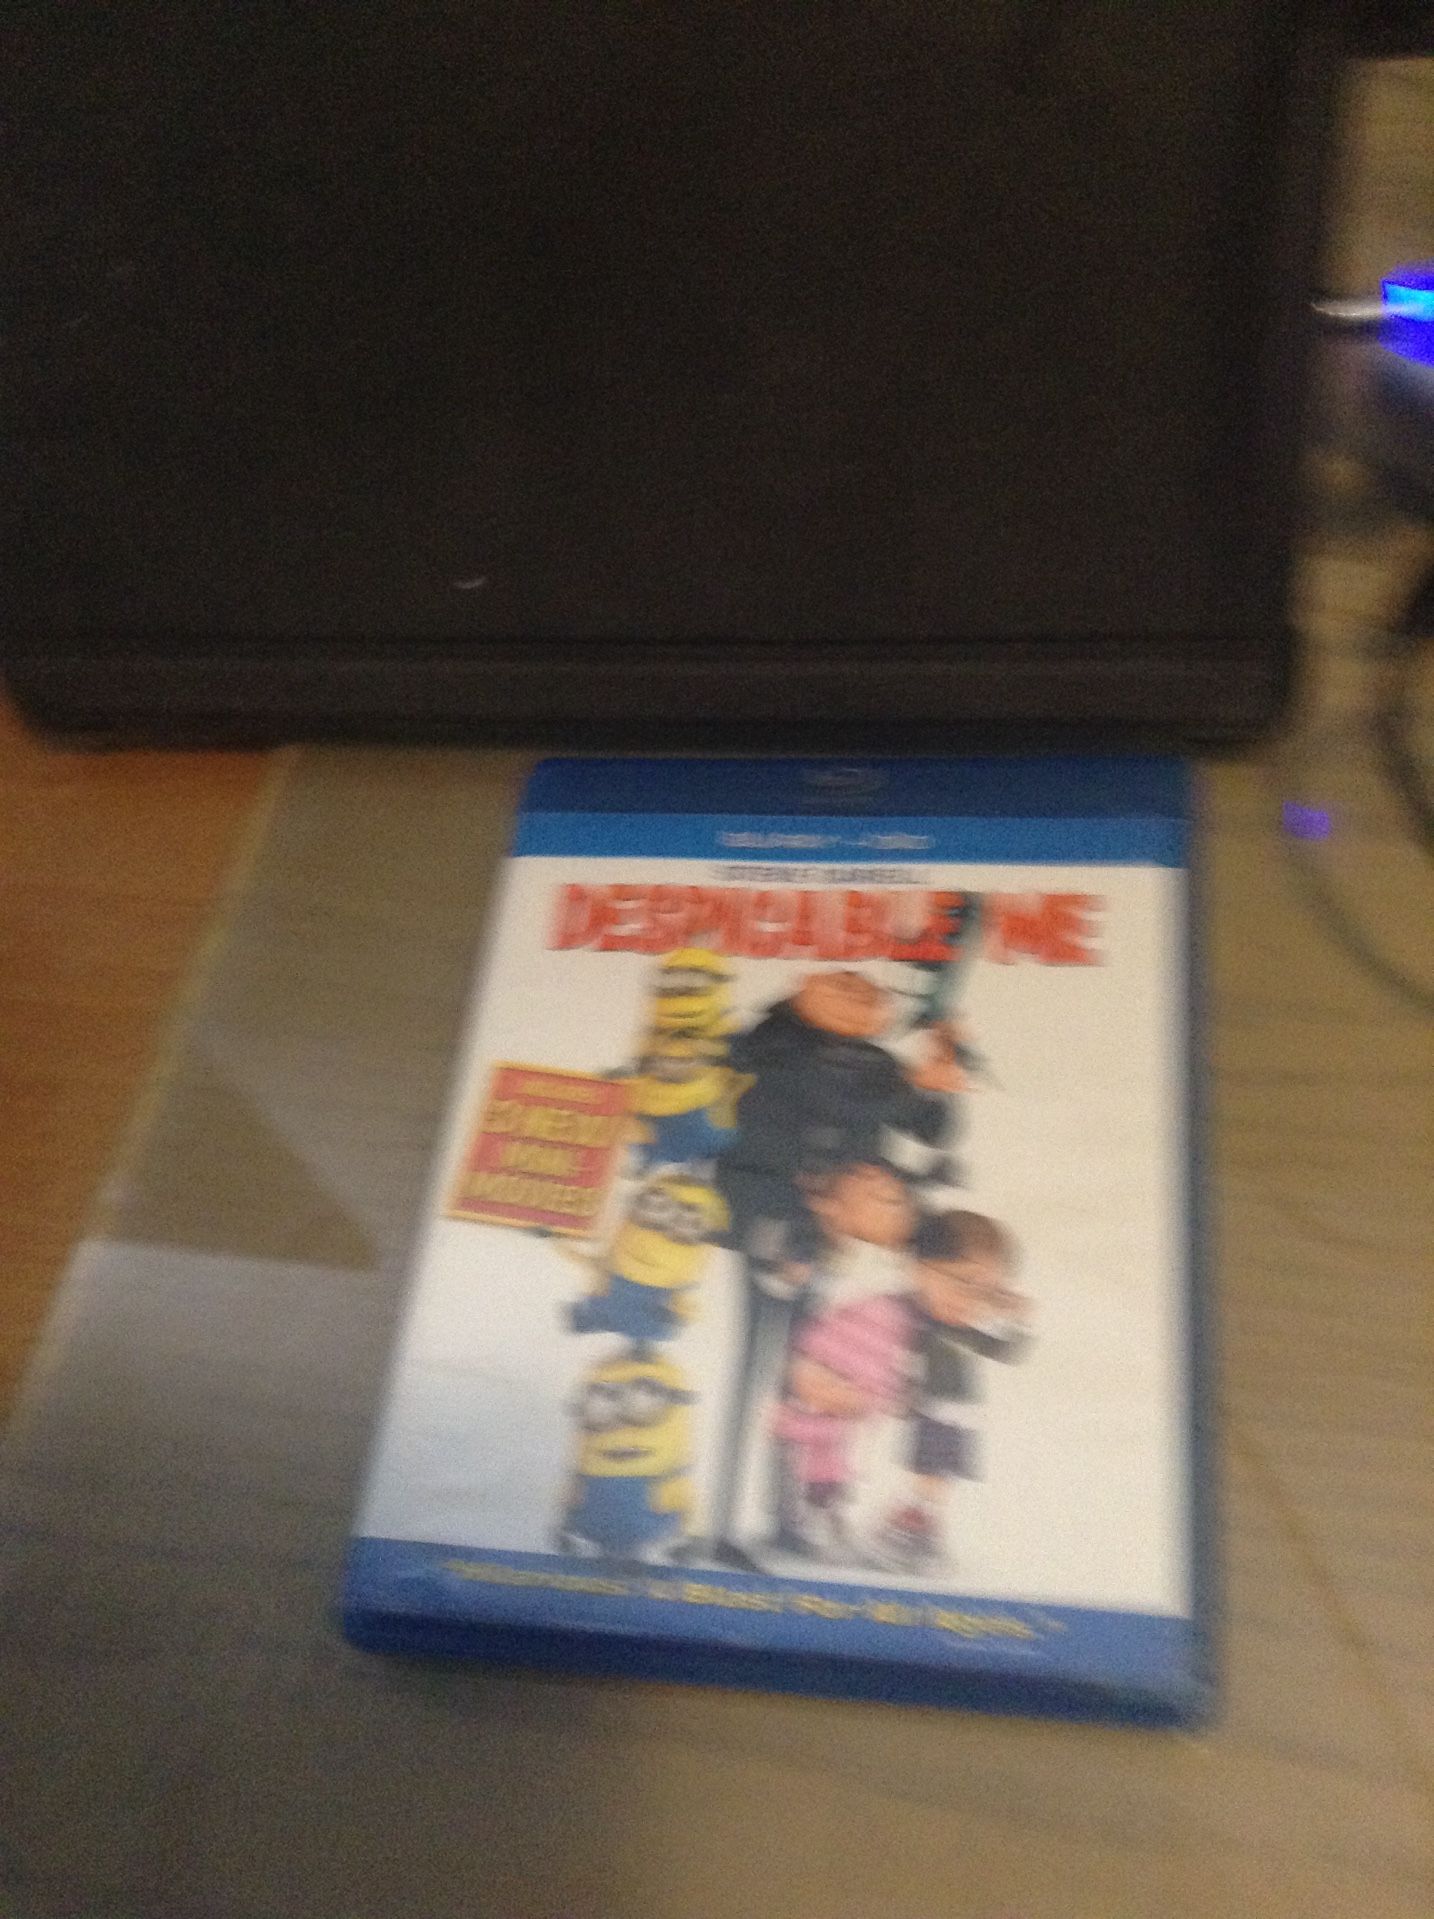 Blu Ray despicable me